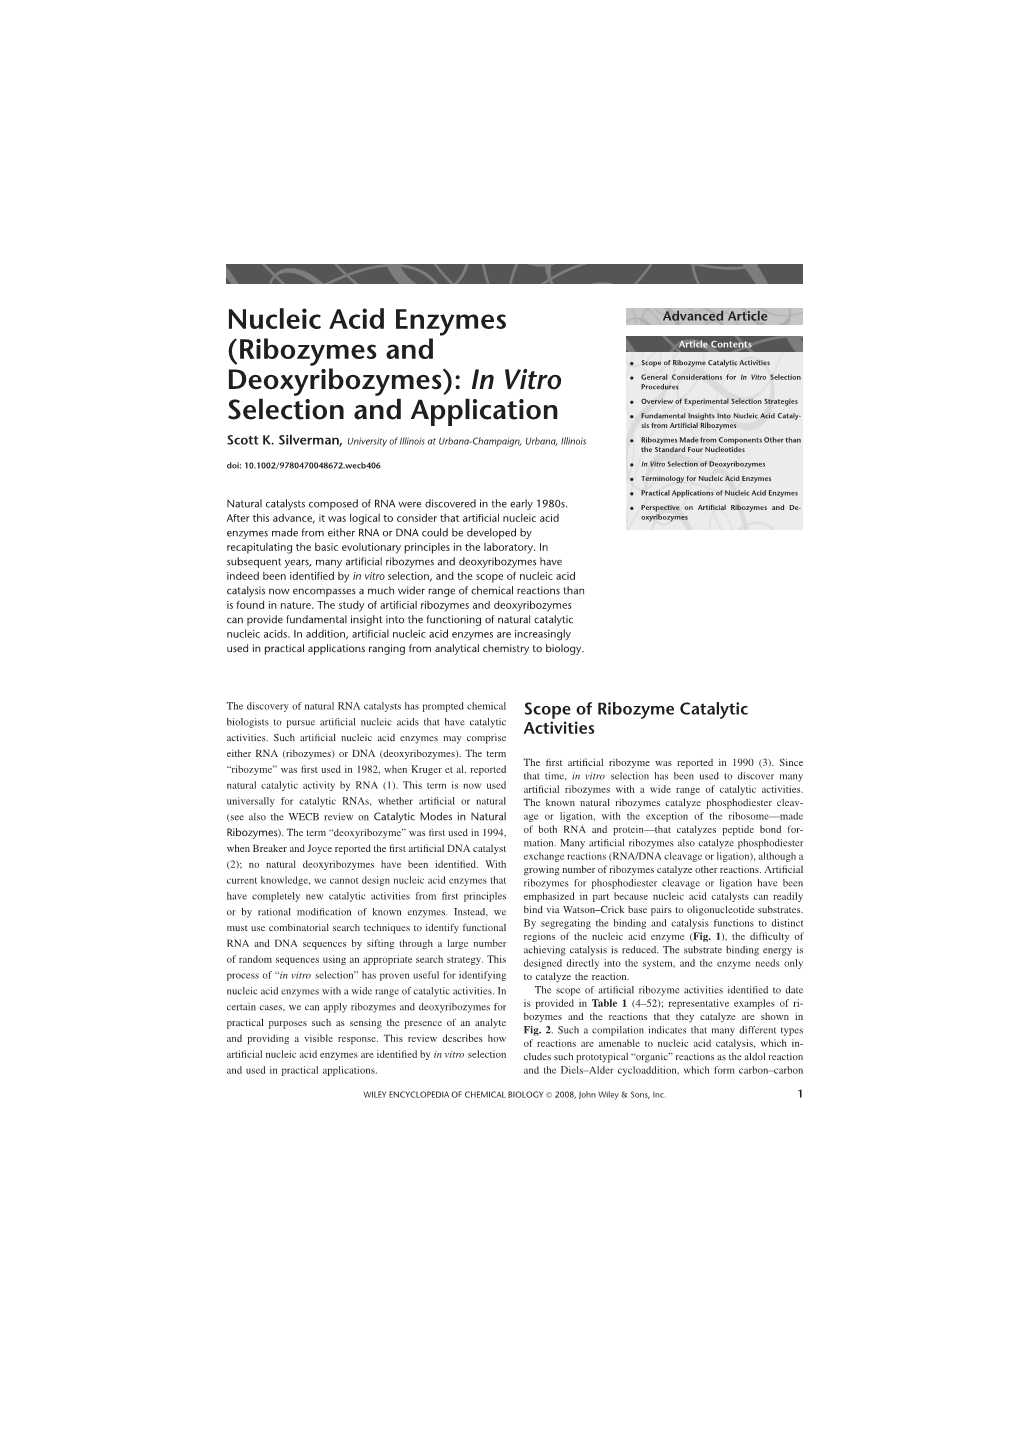 Nucleic Acid Enzymes (Ribozymes and Deoxyribozymes): in Vitro Selection and Application